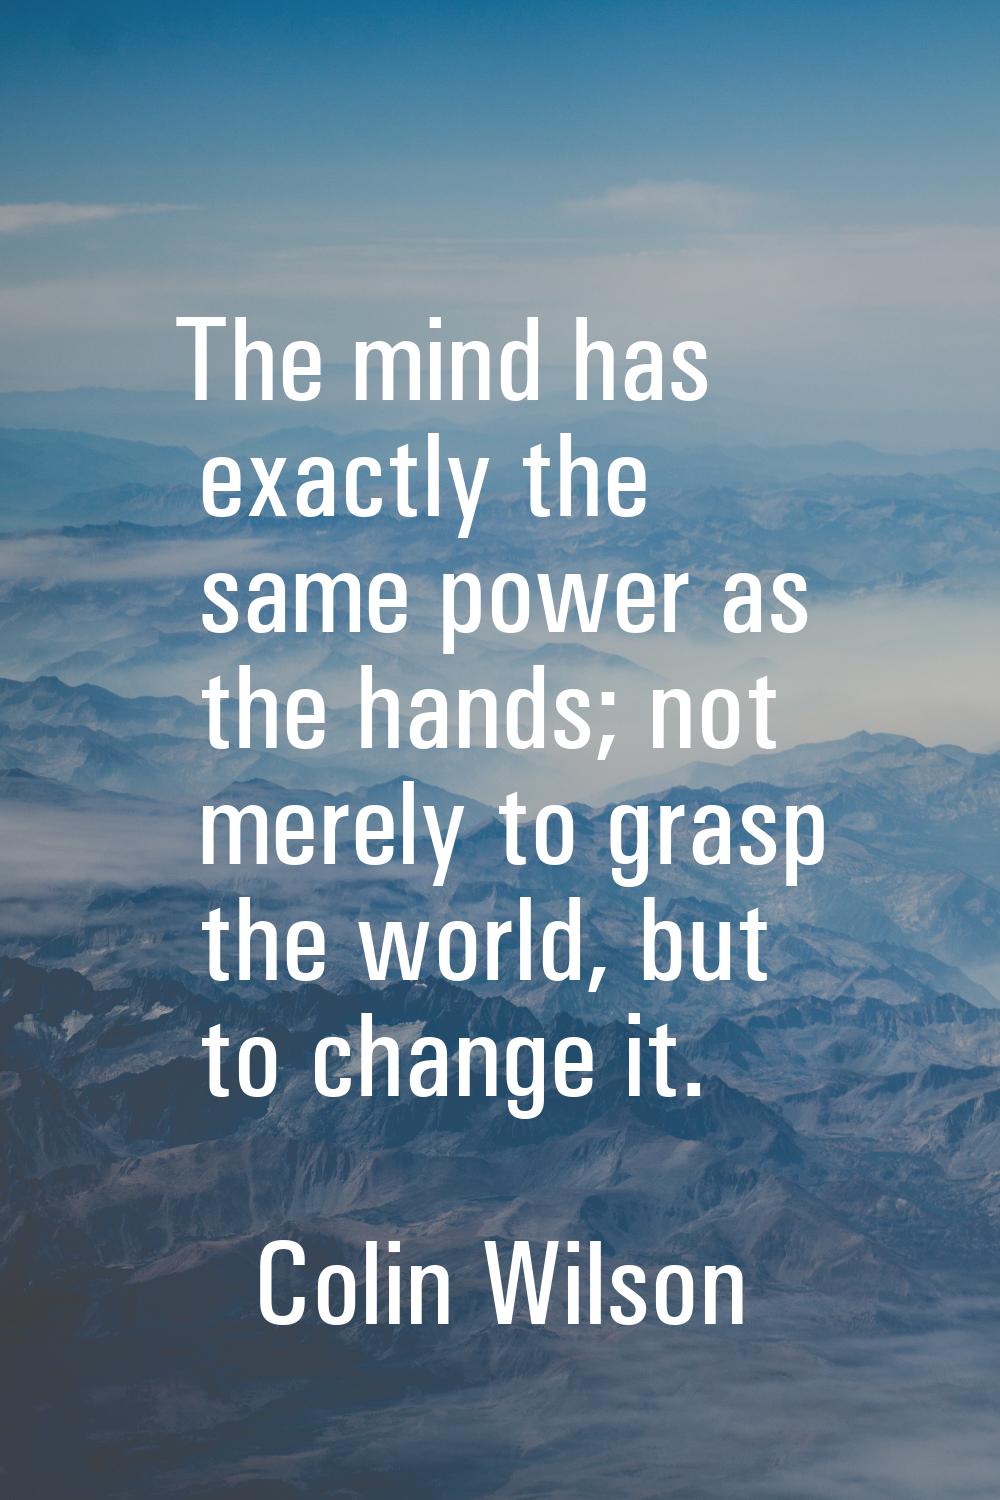 The mind has exactly the same power as the hands; not merely to grasp the world, but to change it.